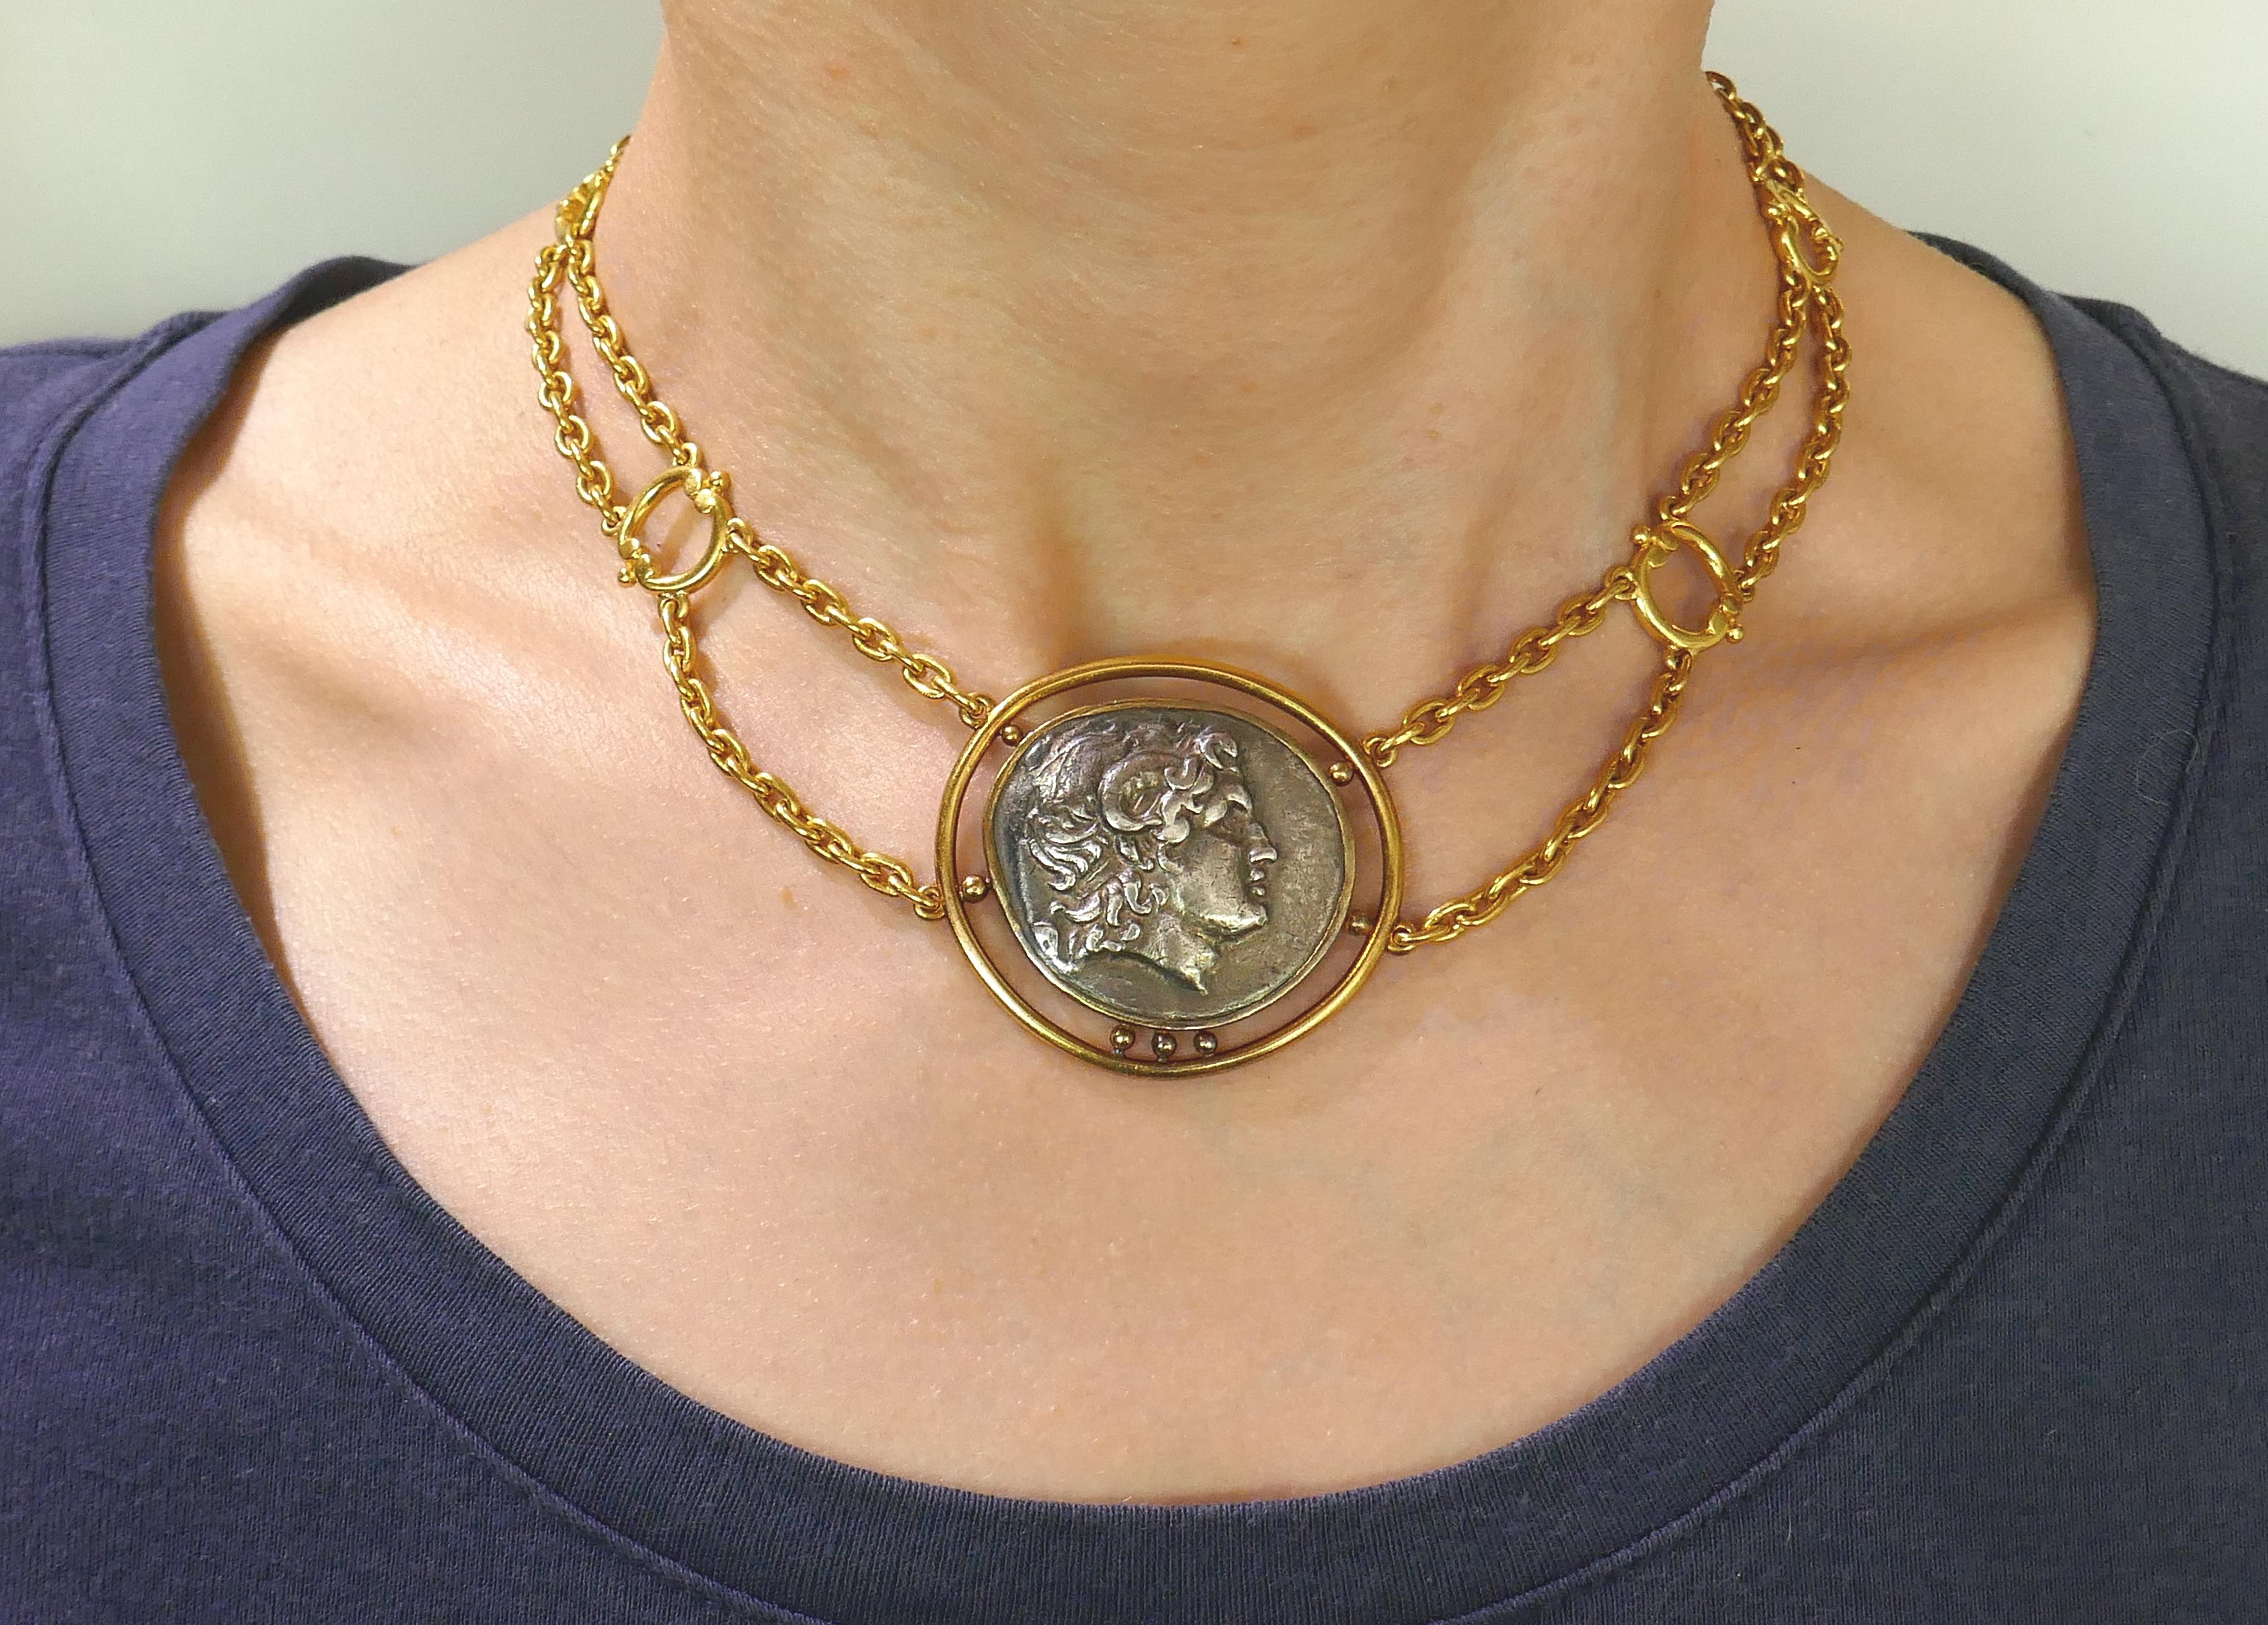 Beautiful coin necklace featuring an ancient Greek coin created by Helen Woodhull in 1979. Trendy, elegant and wearable, the necklace is a great addition to your jewelry collection.
The coin measure 1-1/4 x 1-1/8 (3.2 x 2.9 centimeters). The rest of